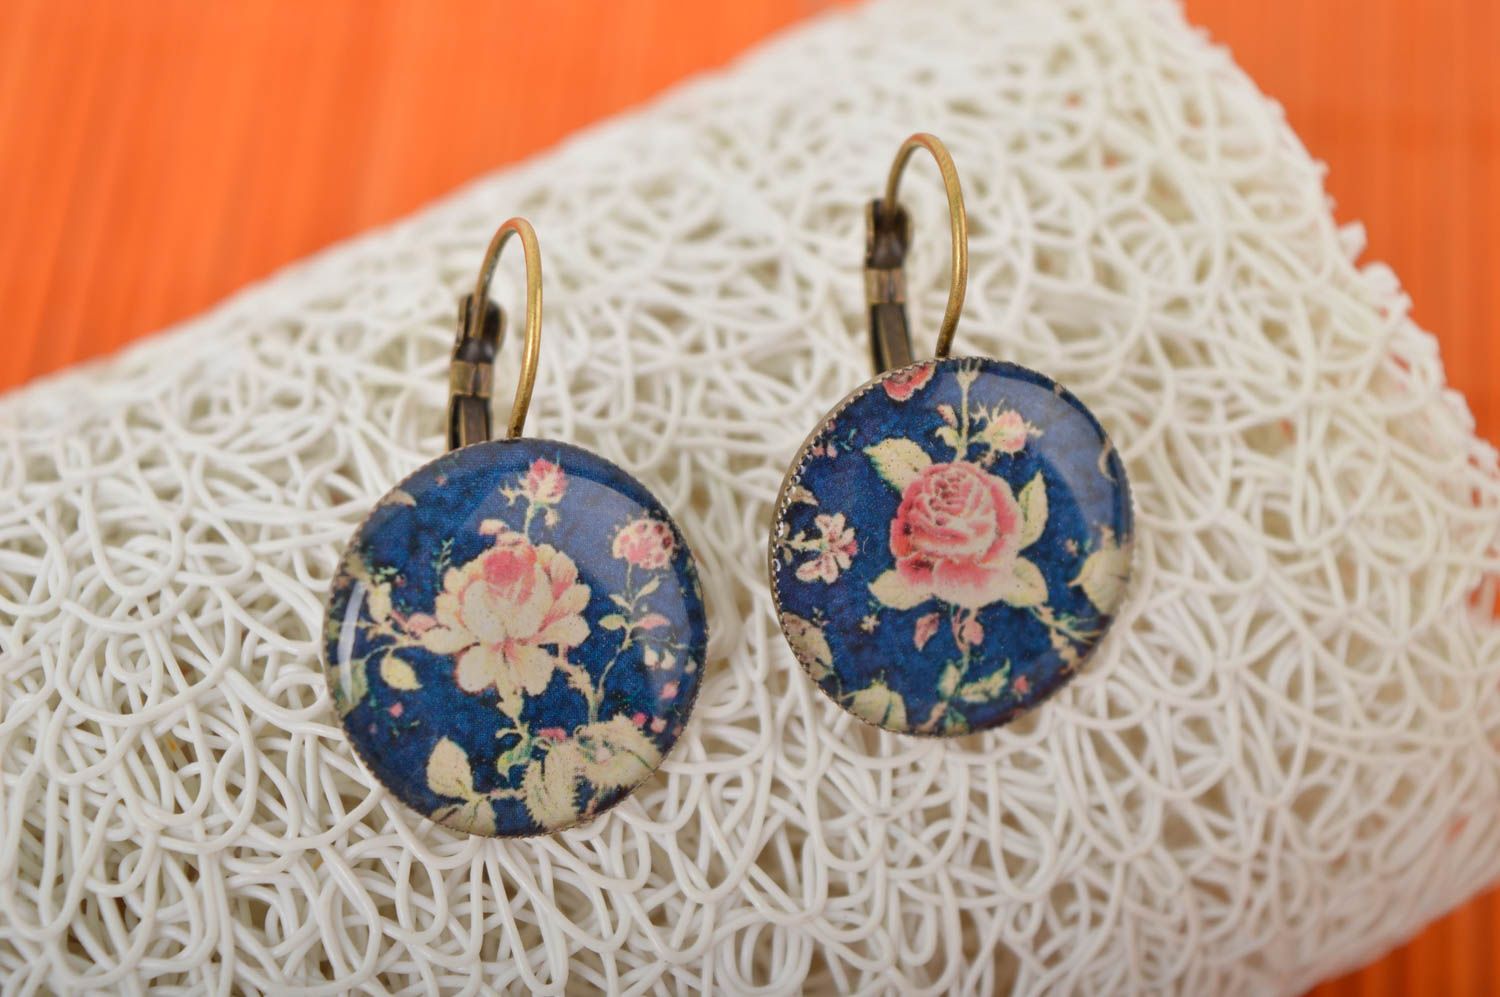 Handmade earrings cute earrings floral jewelry fashion accessories gifts for her photo 1